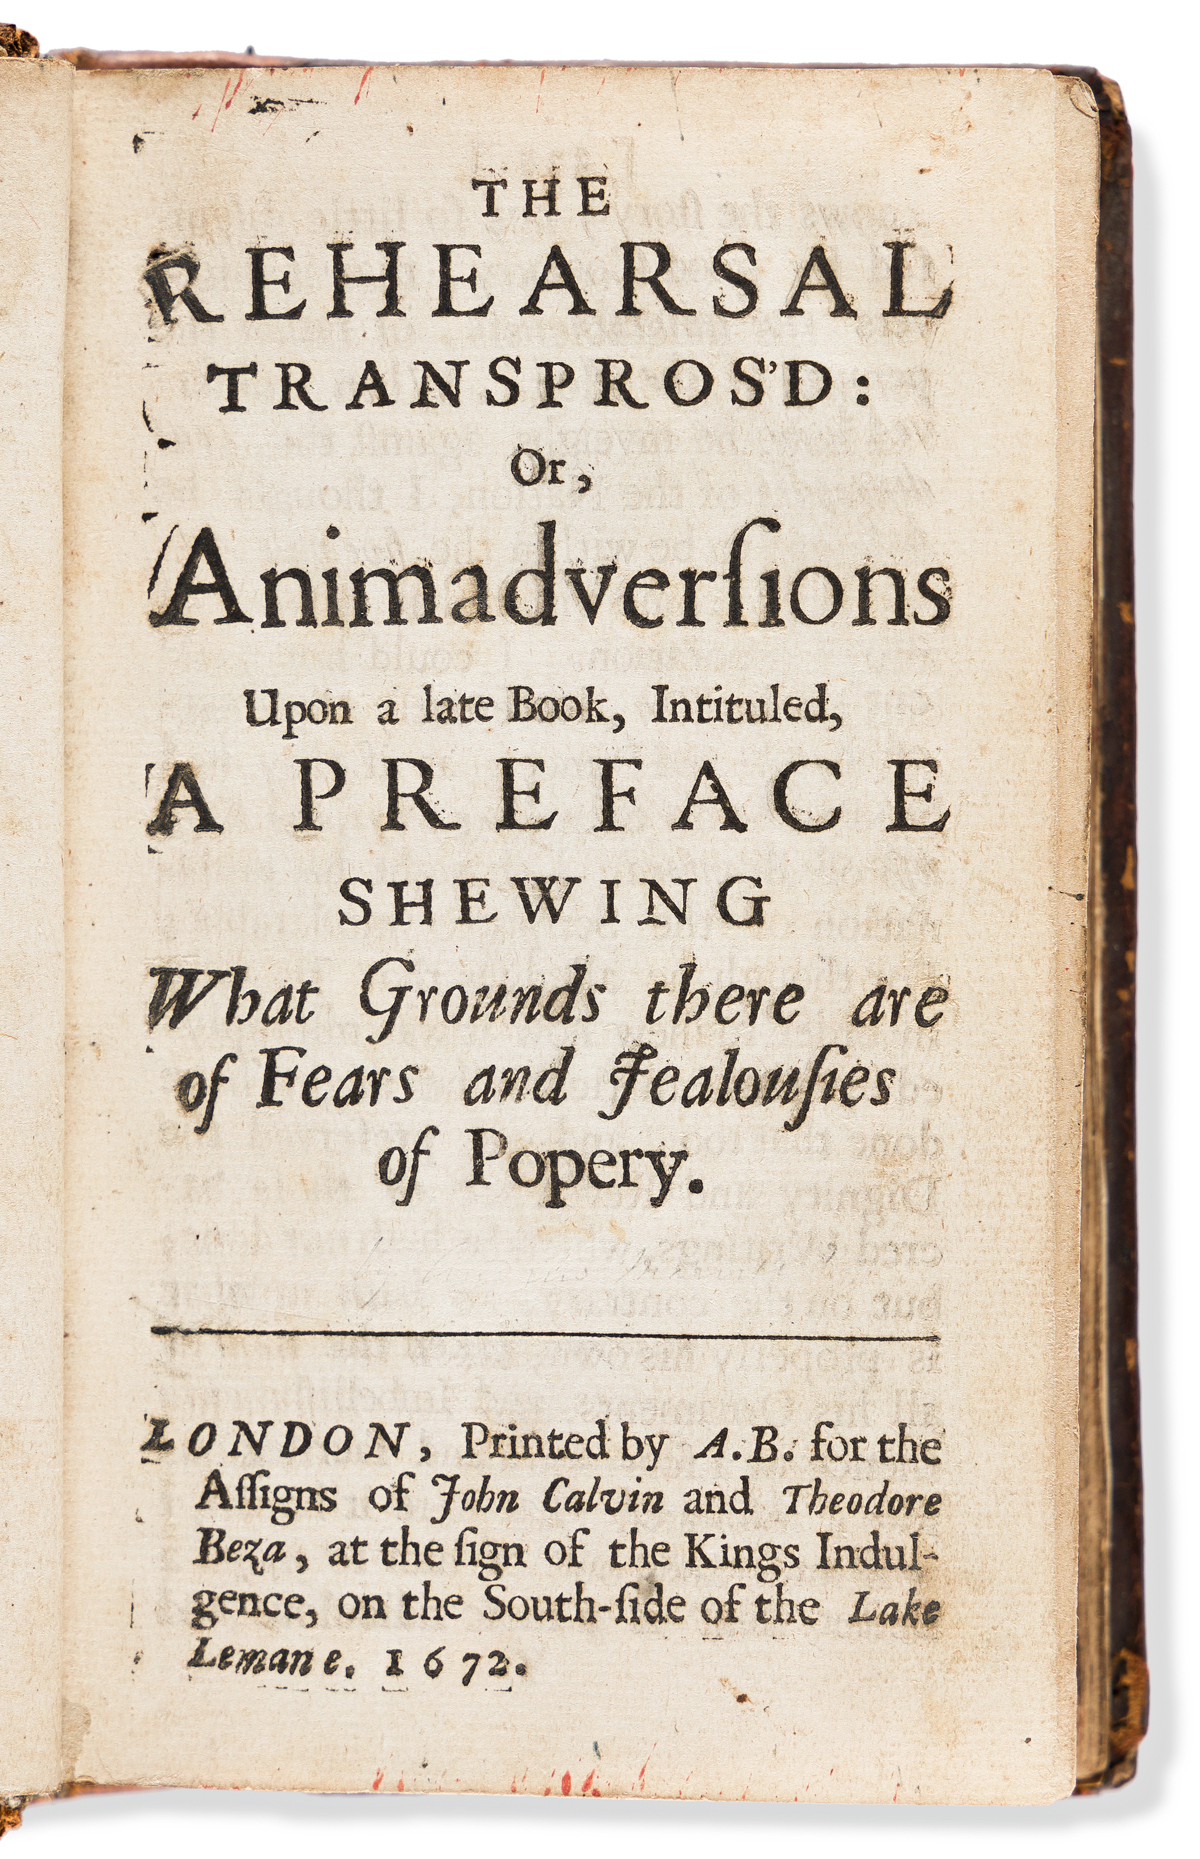 Marvell, Andrew (1621-1678) The Rehearsal Transprosd: Or, Animadversions upon a Late Book, Intituled,